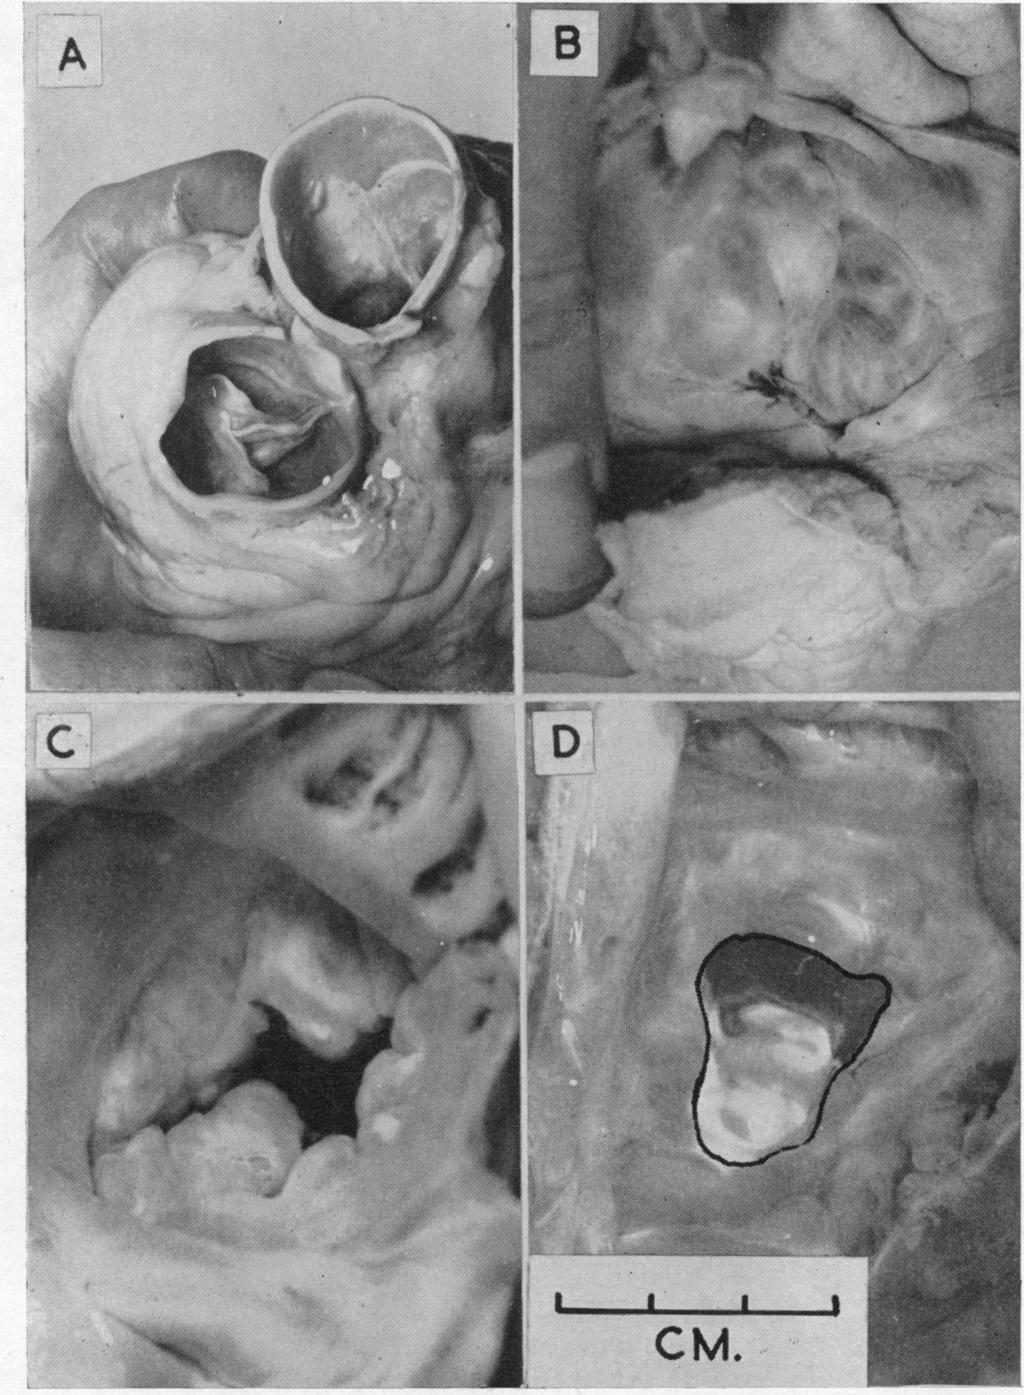 66KORNER AND SHILLINGFORD FIG. 6.-Necropsy photographs of the tricuspid valves during retrograde perfusion of the right ventricle. (A) Normal pulmonary valve. (B) Normal tricuspid valve.